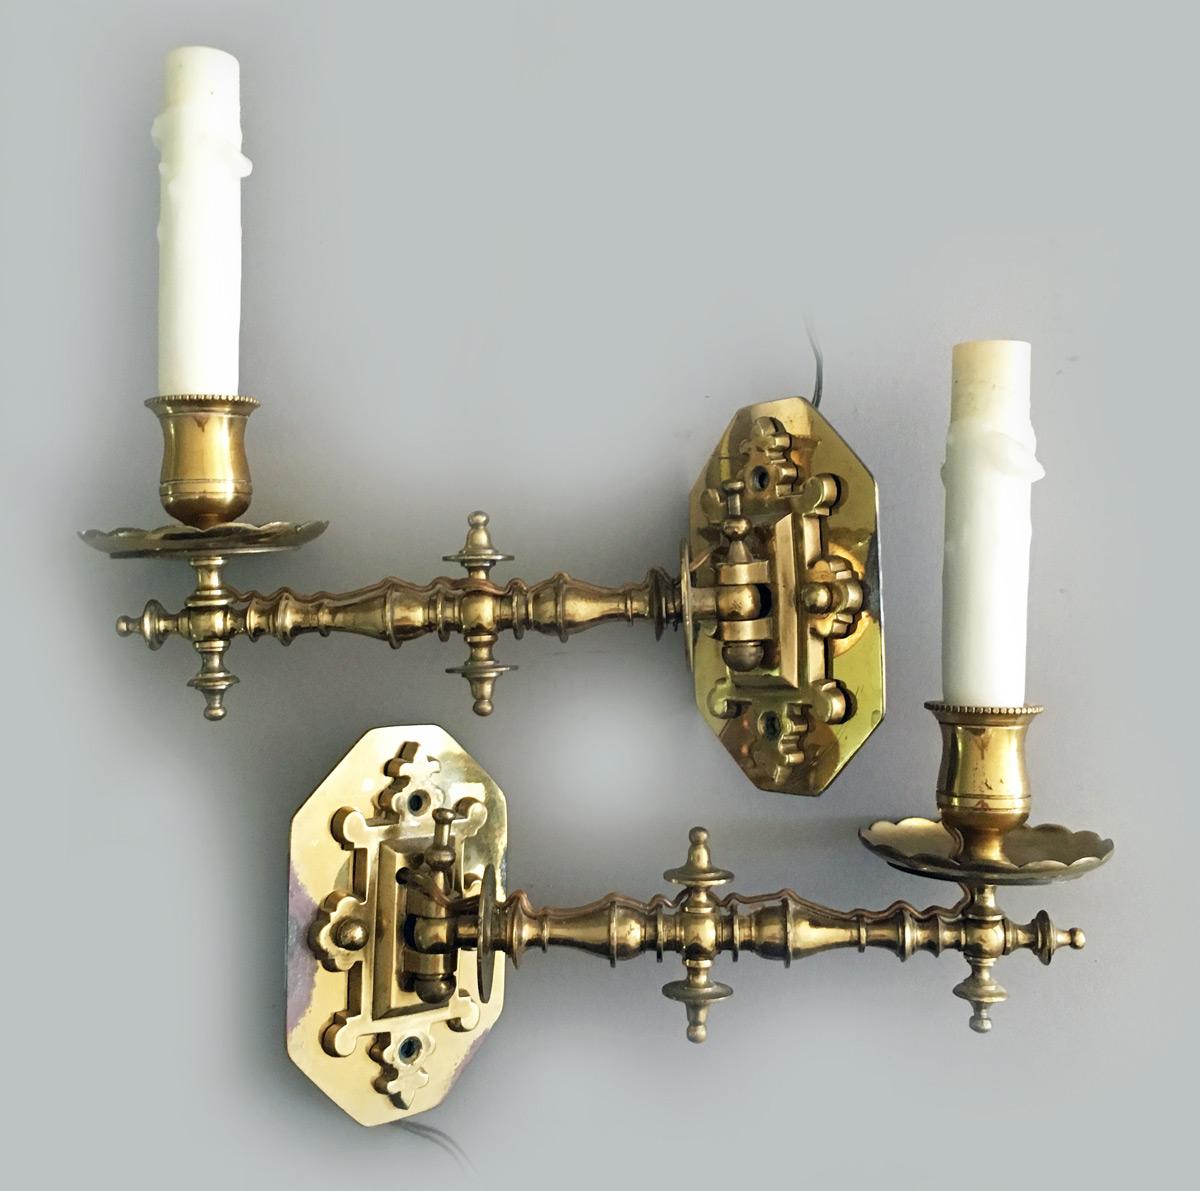 Unusual pair of brass one-light wall sconces in the gothic taste with turnings and decorative finials, scalloped bobeches and wax candle covers.